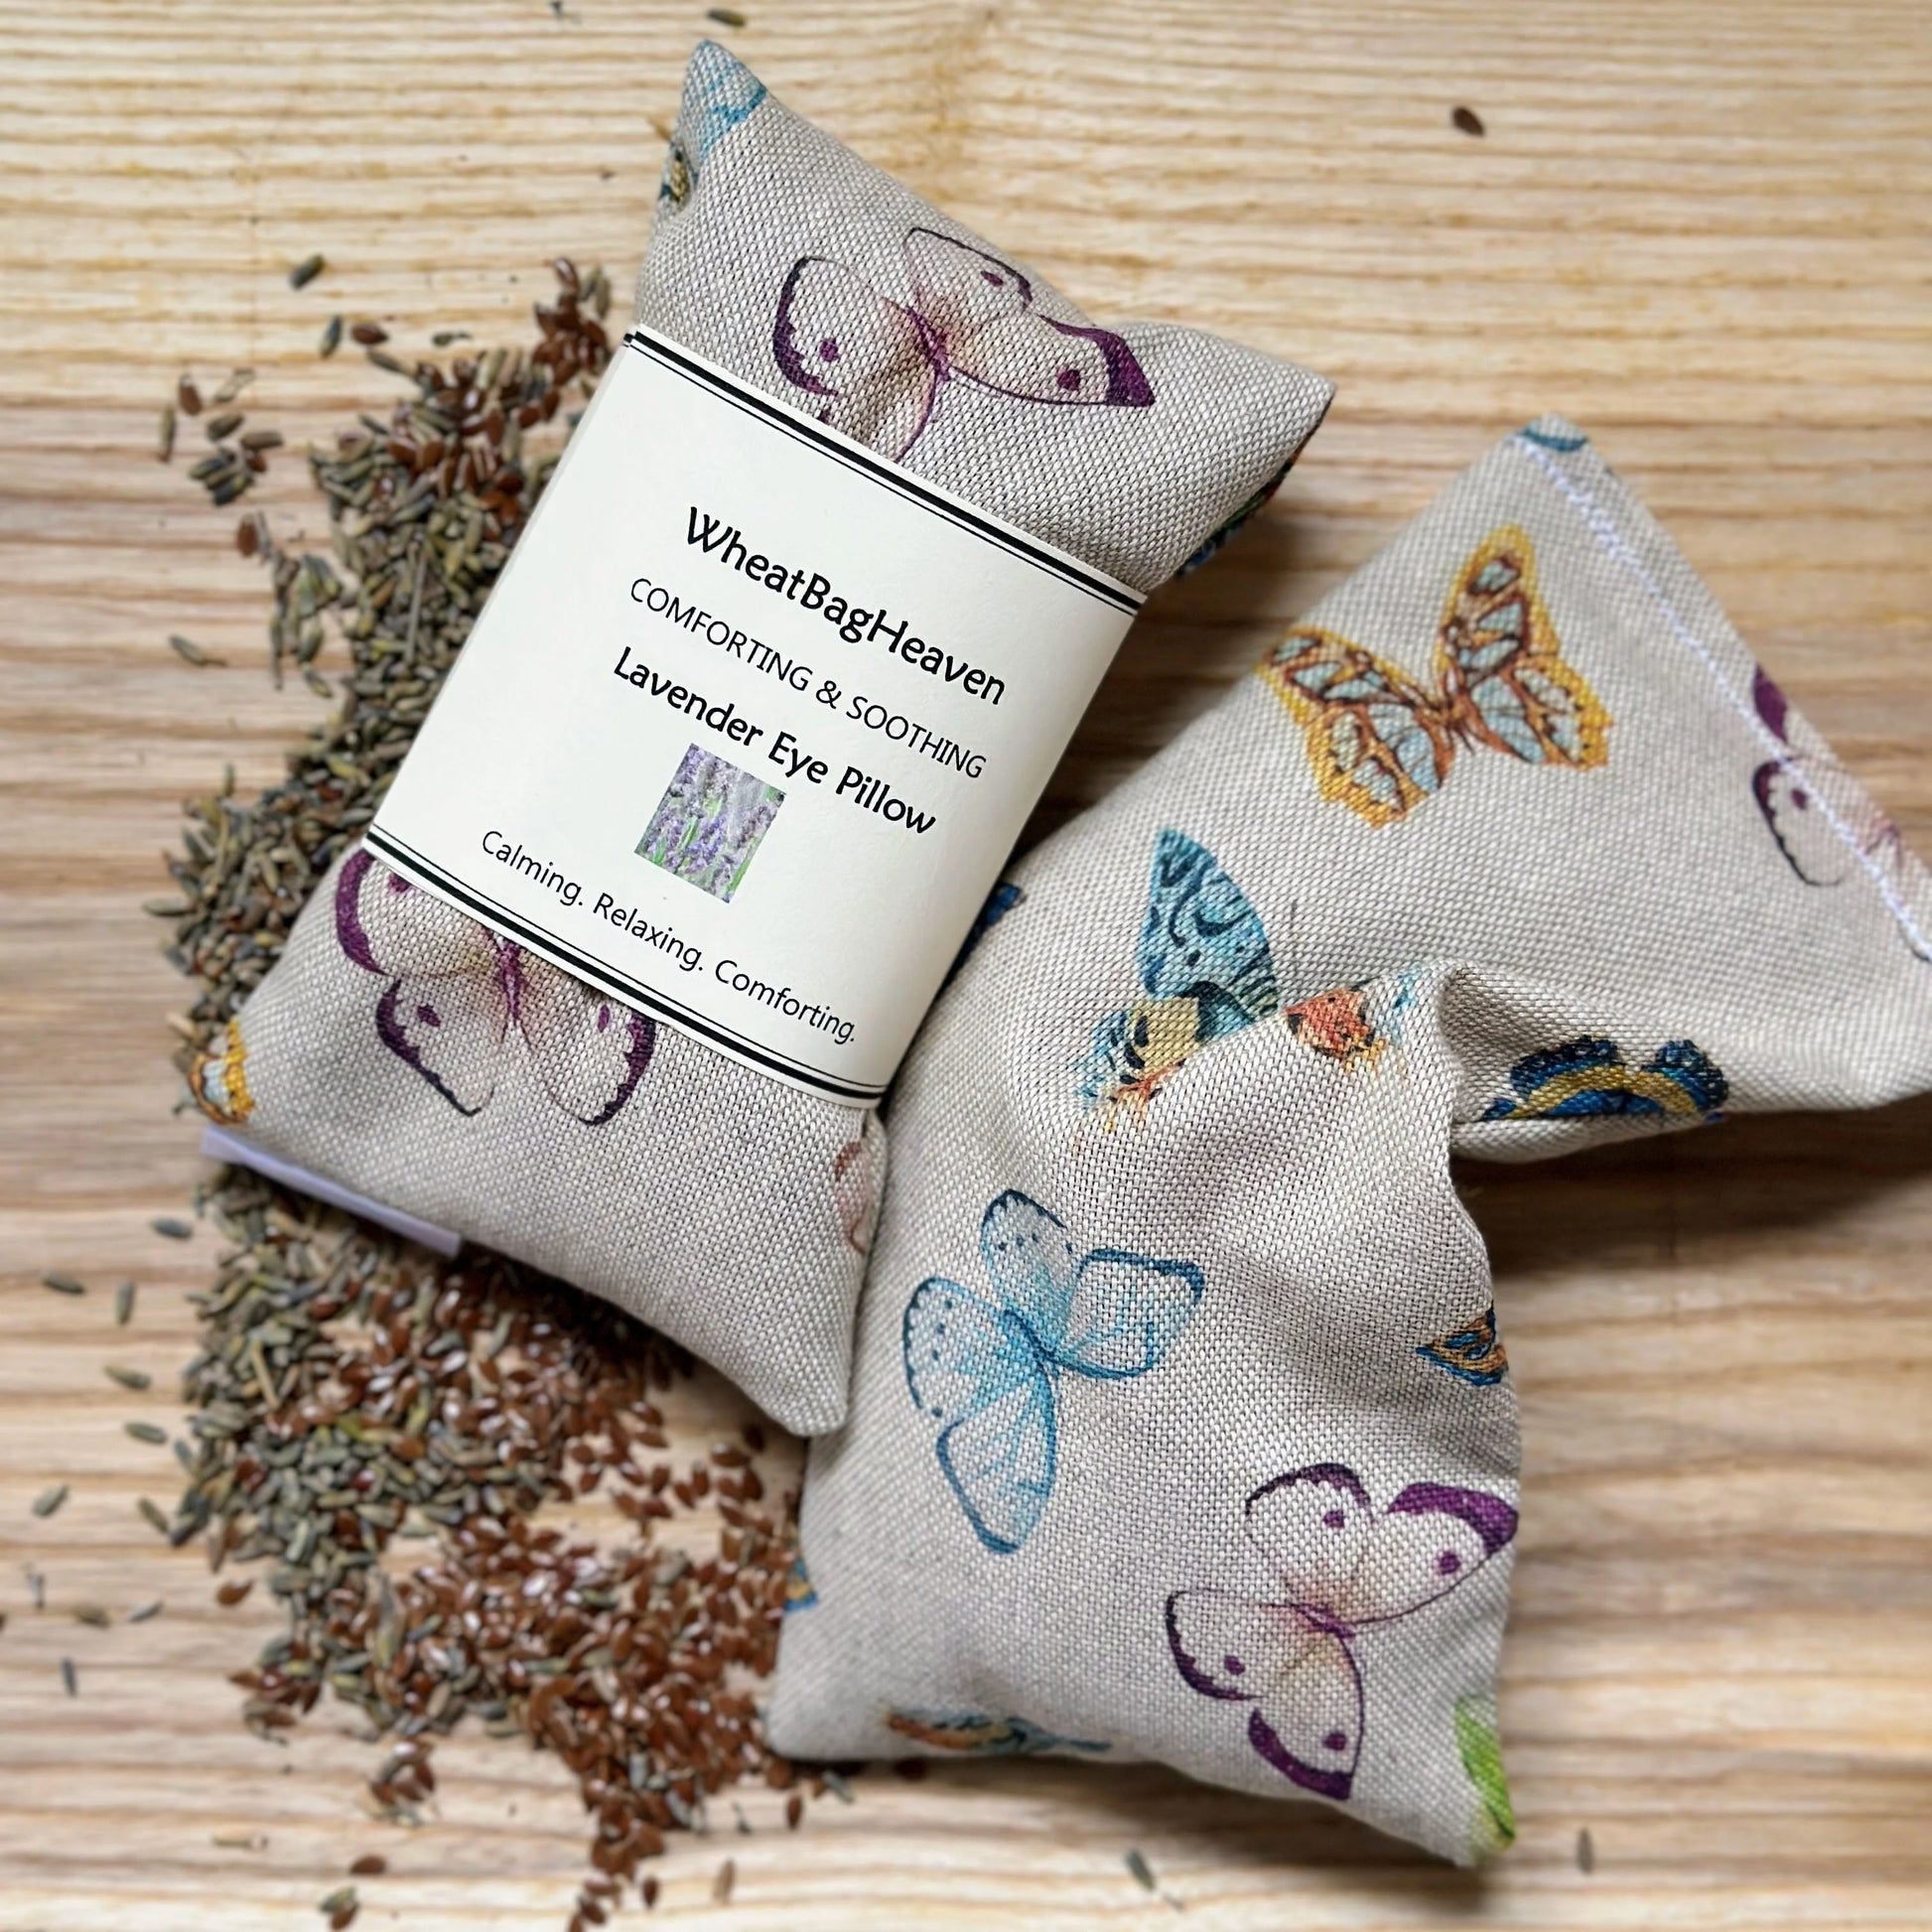 Butterfly printed eye pillows for yoga meditation an restful sleep from wheat bag heaven